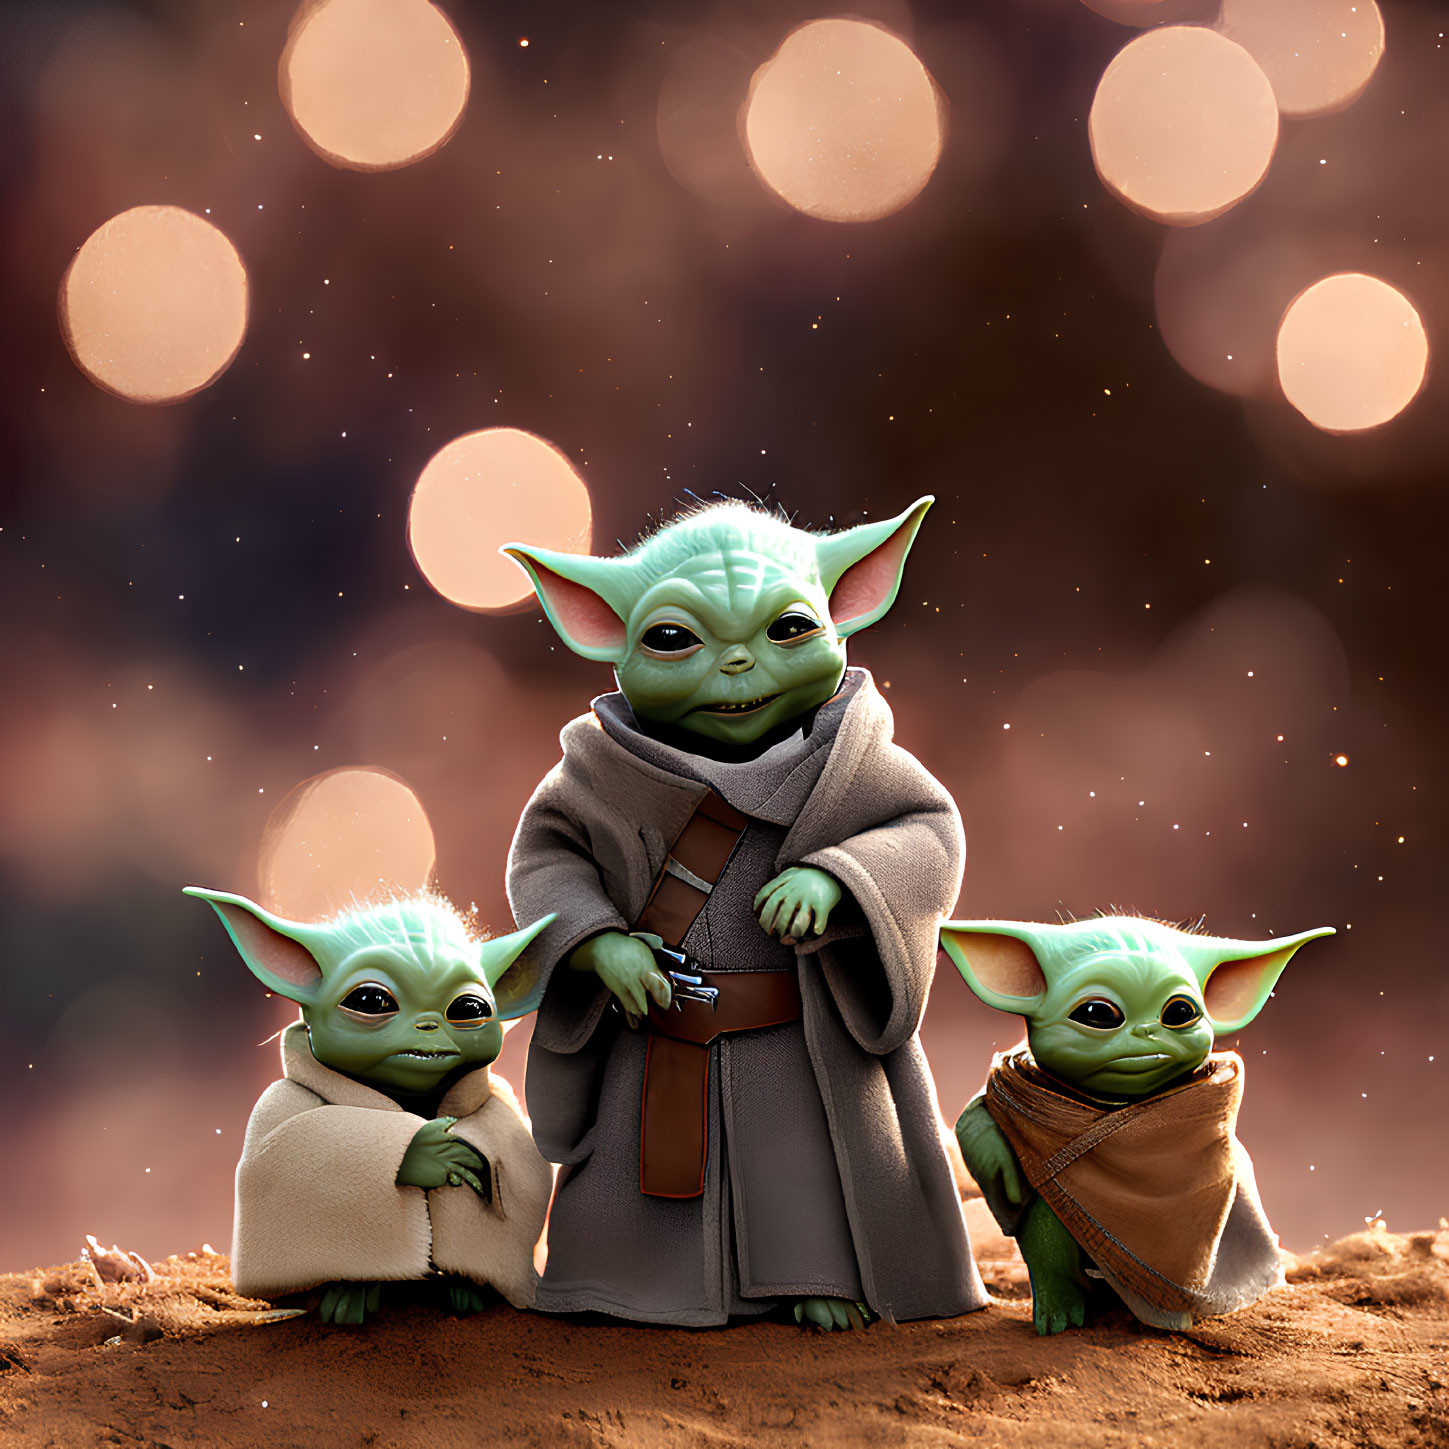 Three Yoda-like figures with large ears and wise expressions among glowing orbs.